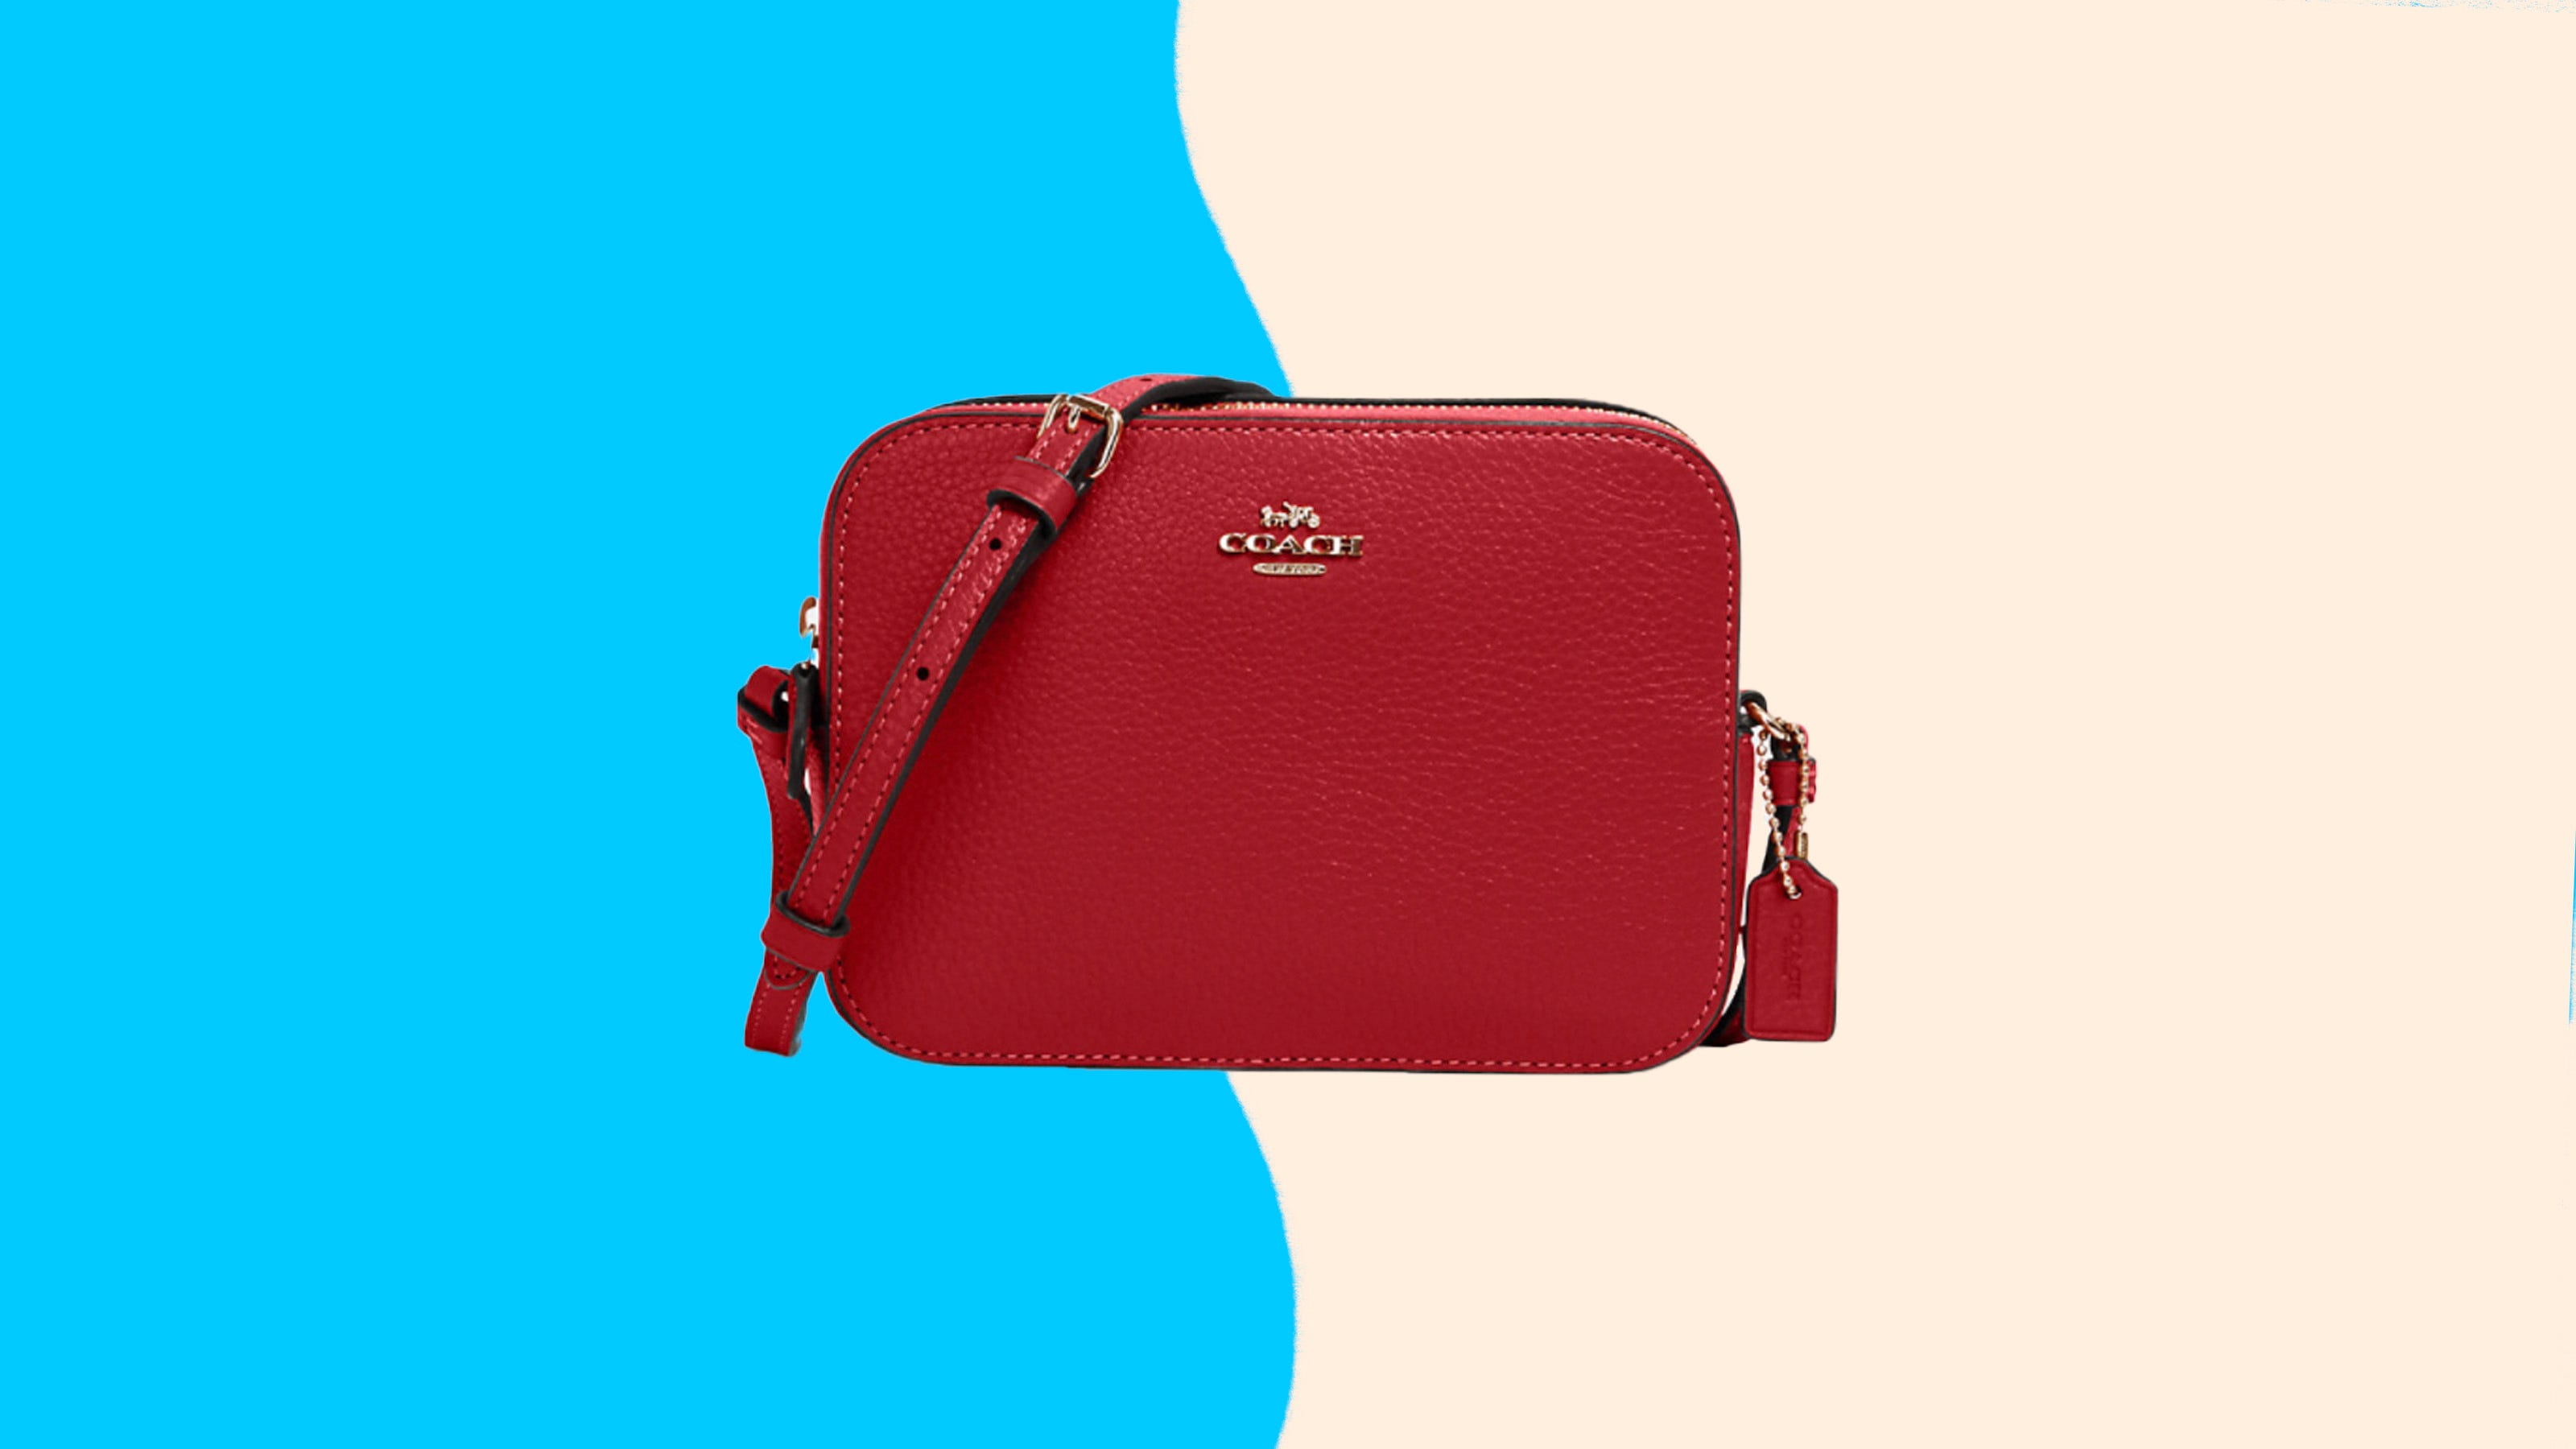 Coach purse: Save now on handbags, satchels and crossbodies